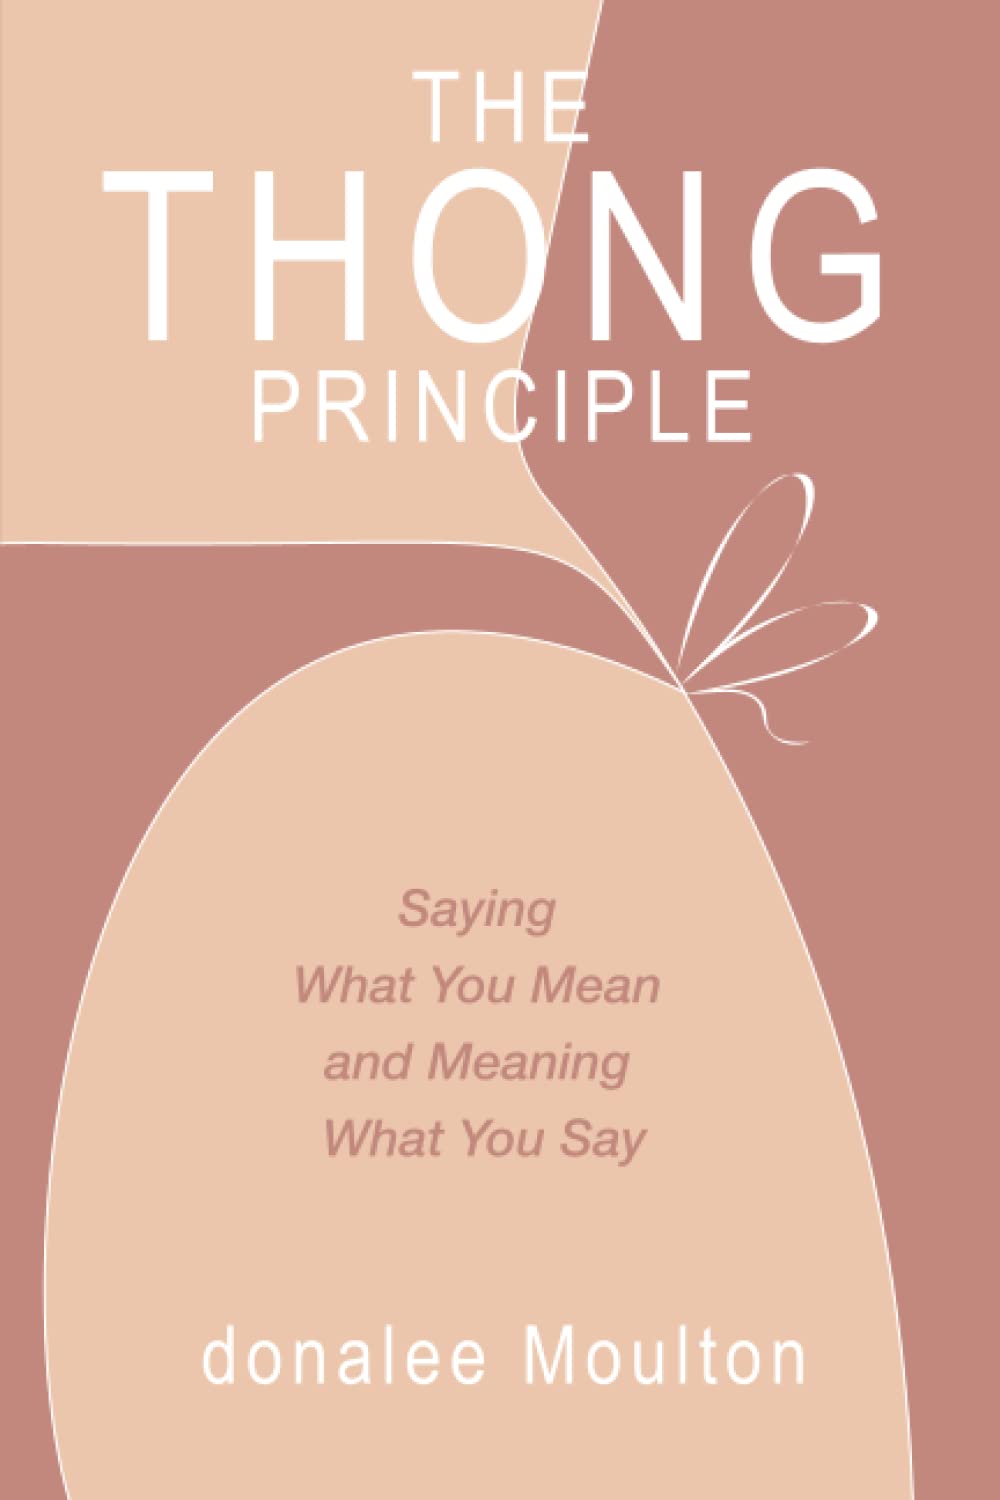 The Thong Principle: Saying What You Mean and Meaning What You Say - SureShot Books Publishing LLC